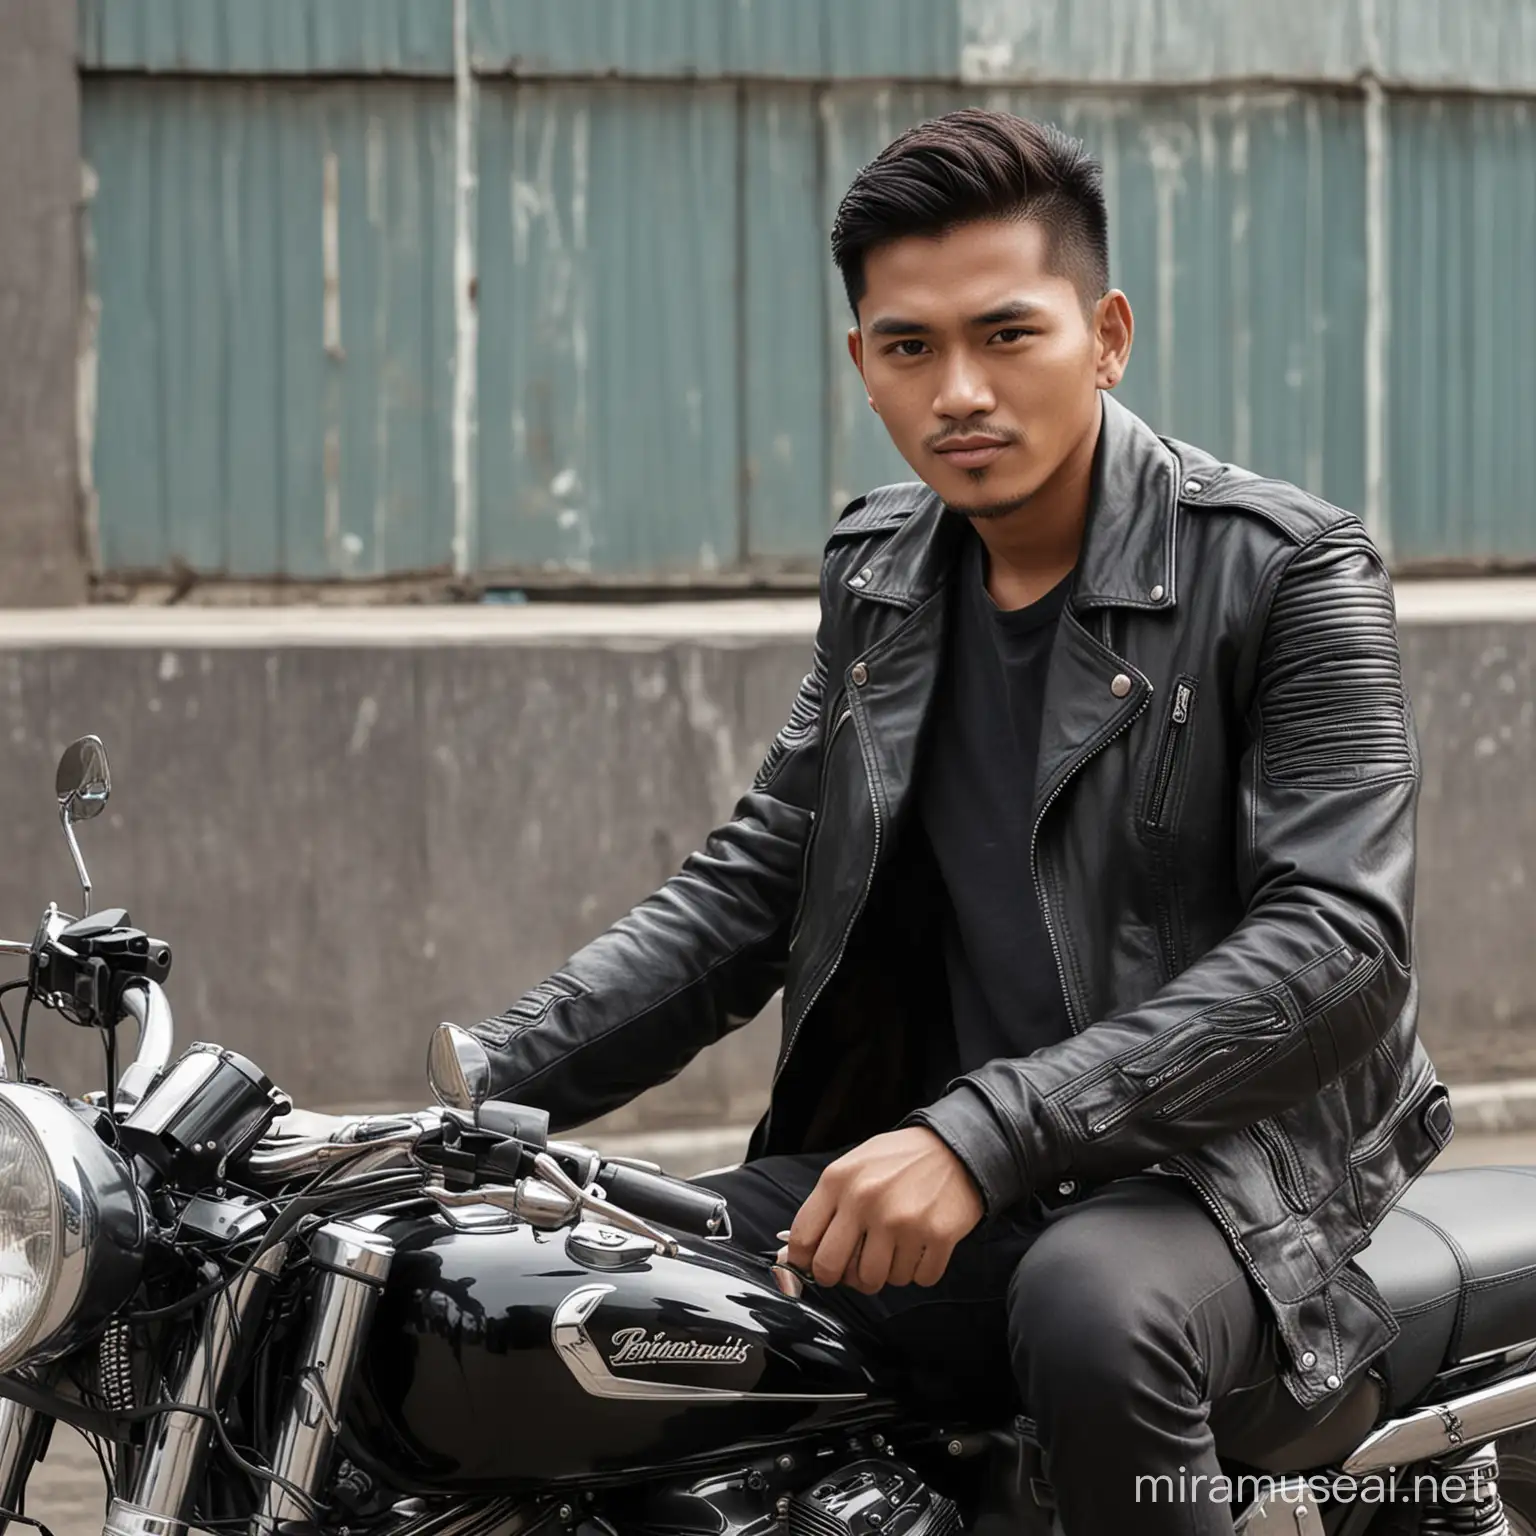 Vintage Indonesian Man in Leather Jacket on Motorcycle